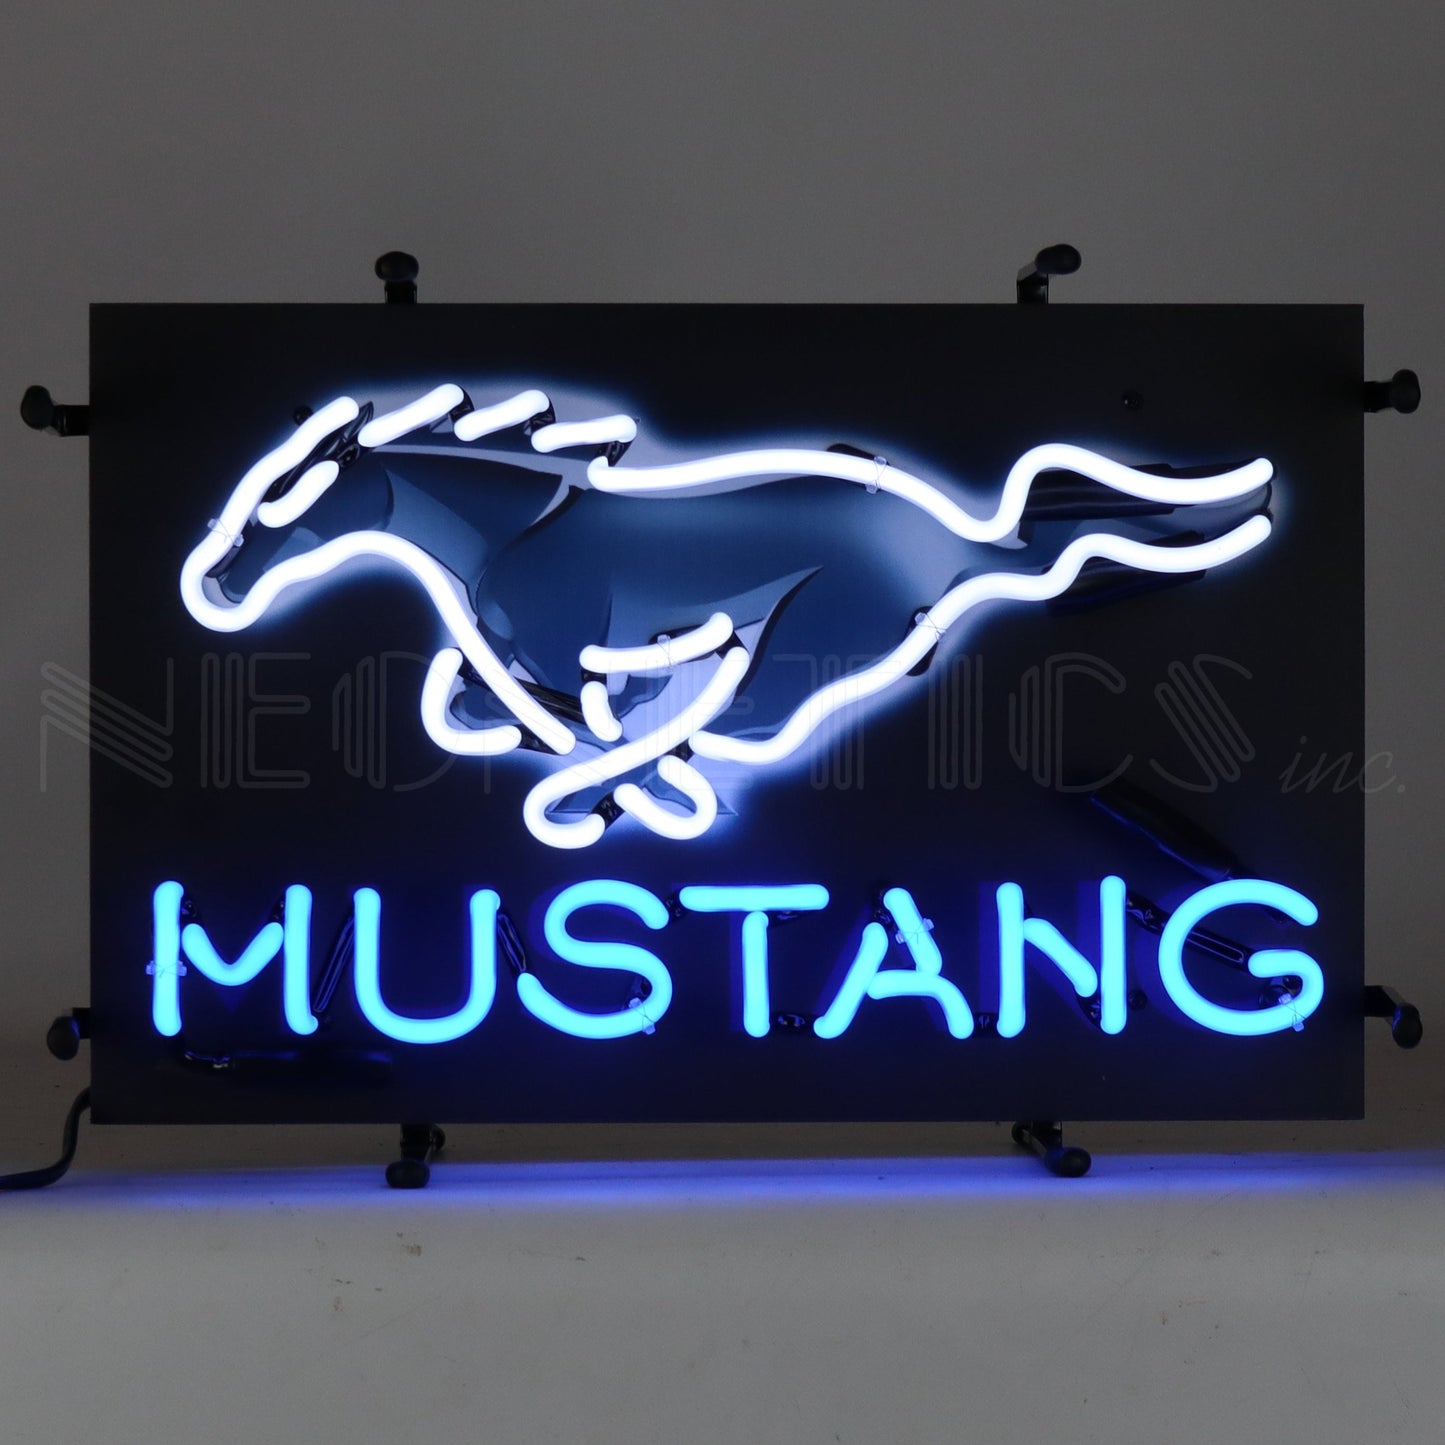 Ford Mustang Junior Neon Sign featuring iconic white horse logo on black with blue lettering for indoor use.